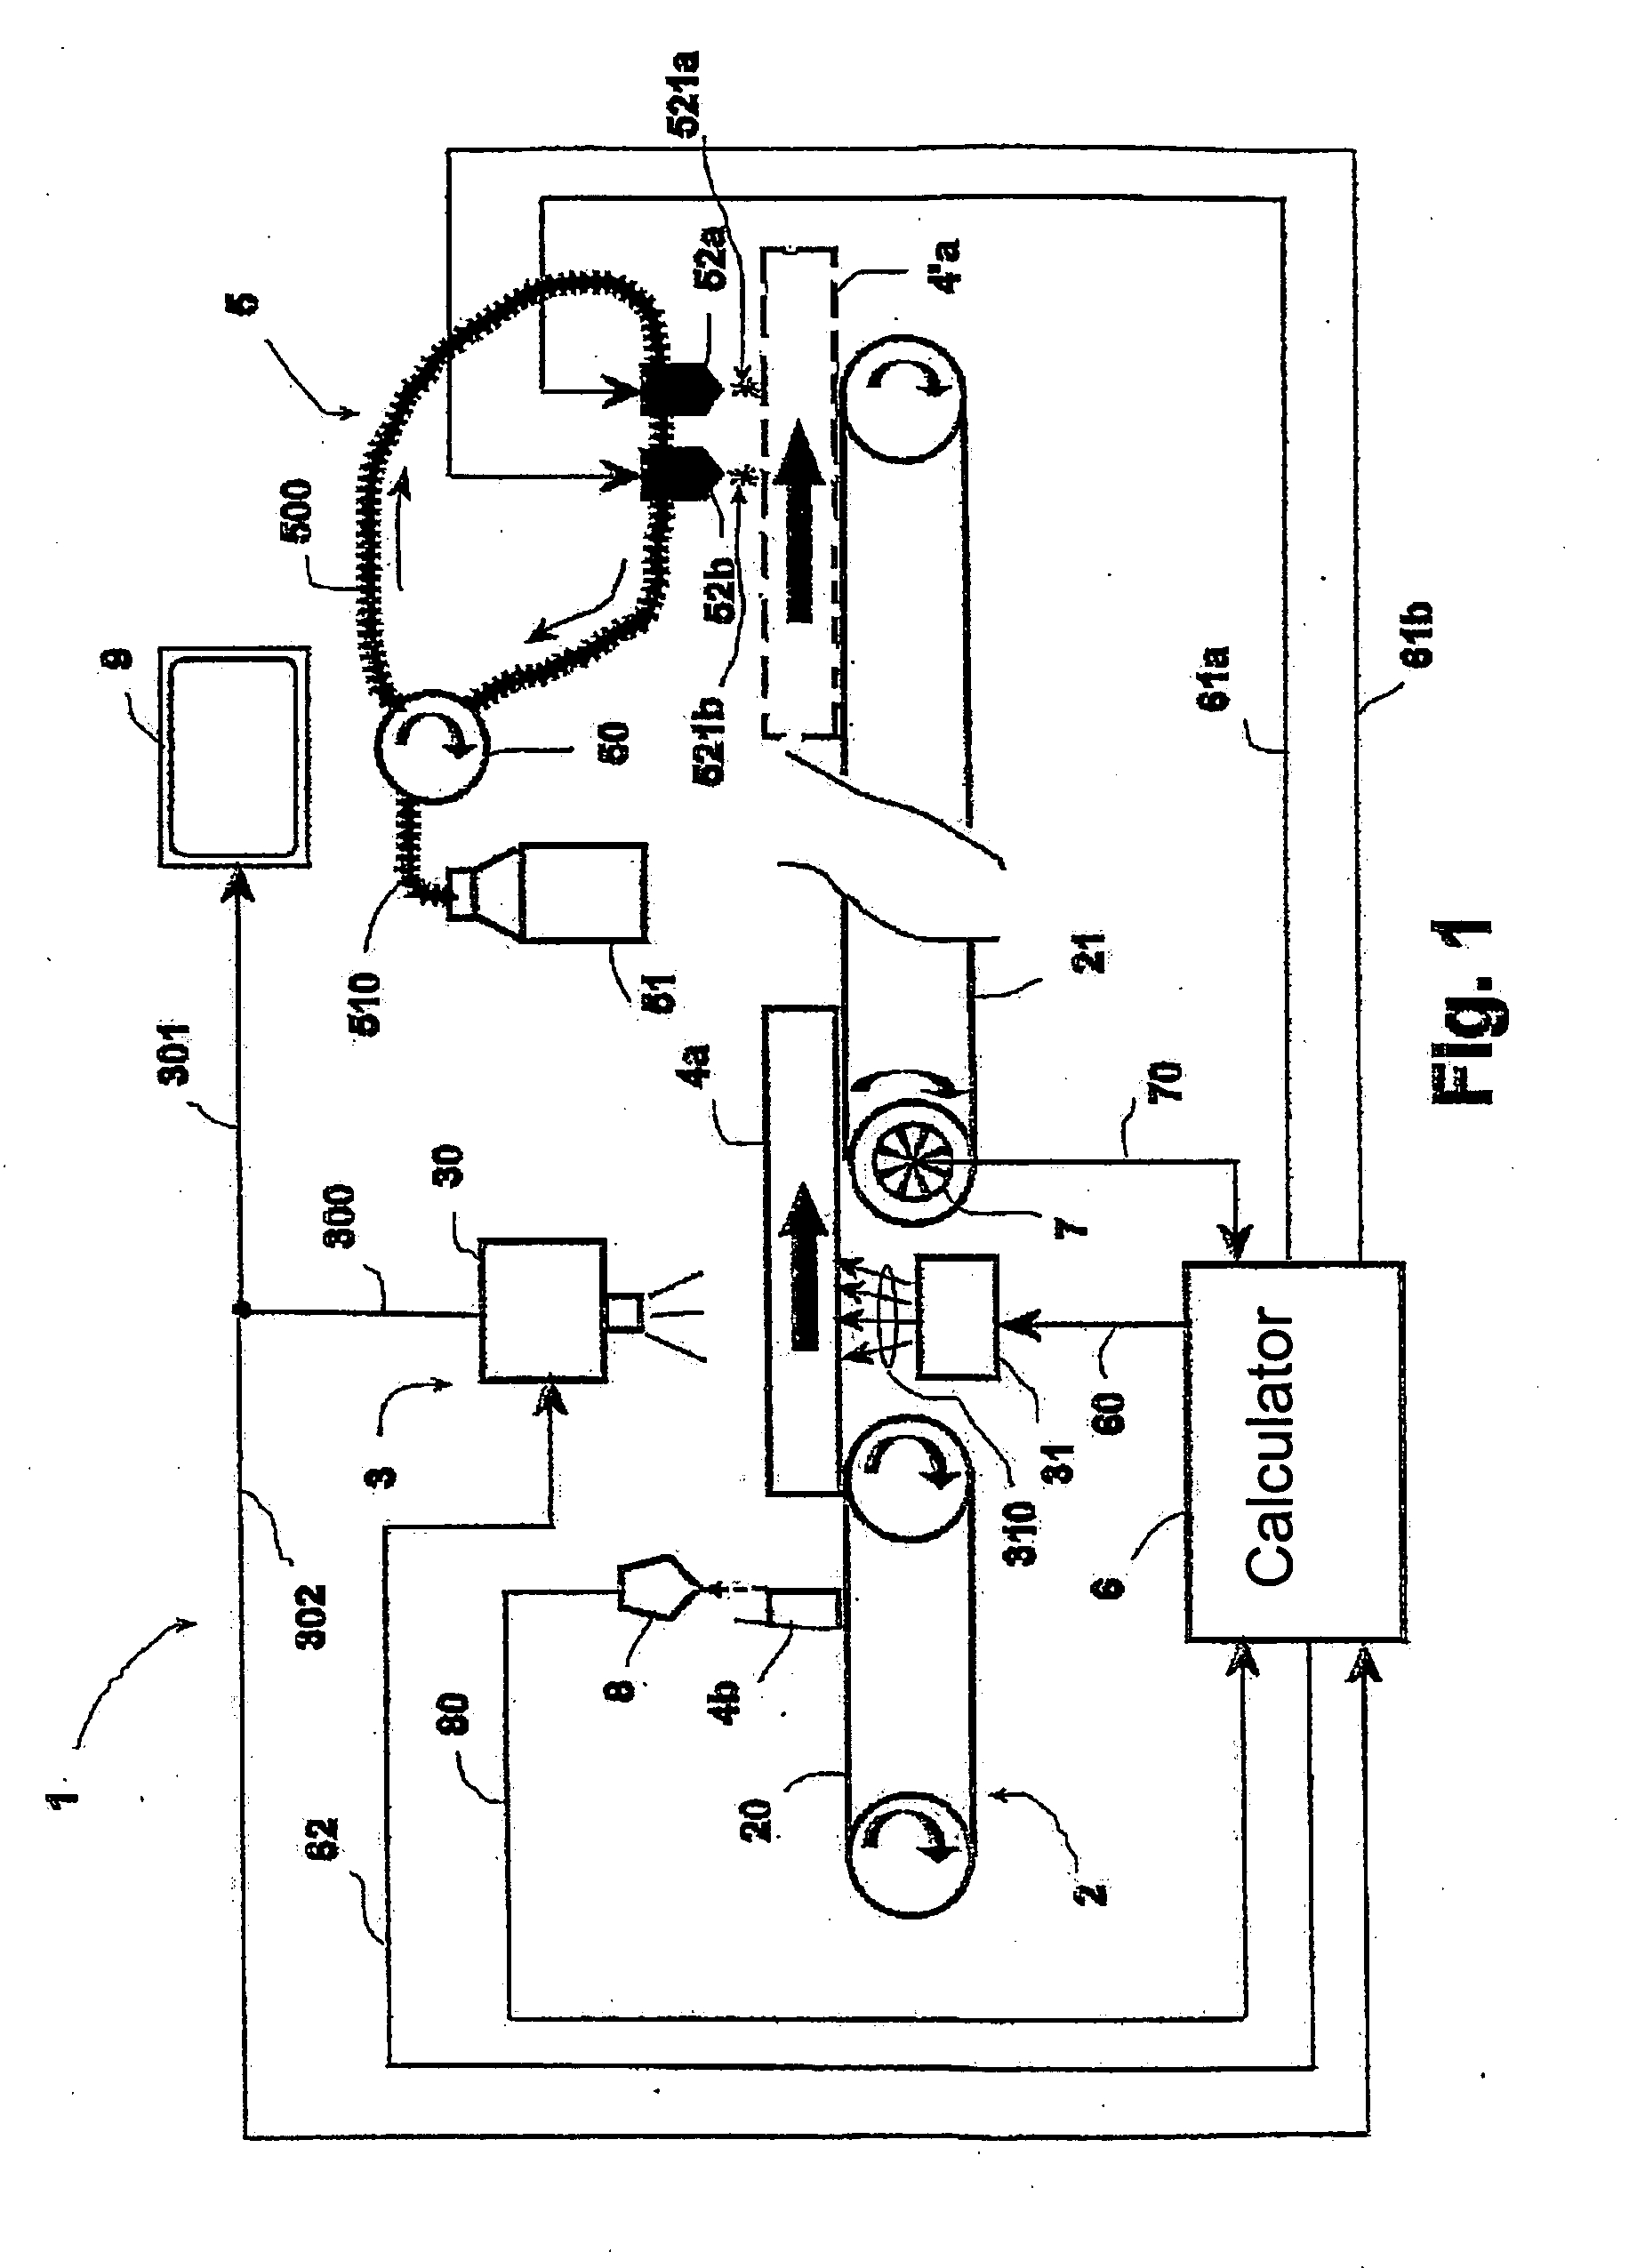 Installation For Candling Eggs And Optoelectronic System For Examining Under Radiation Such An Installation